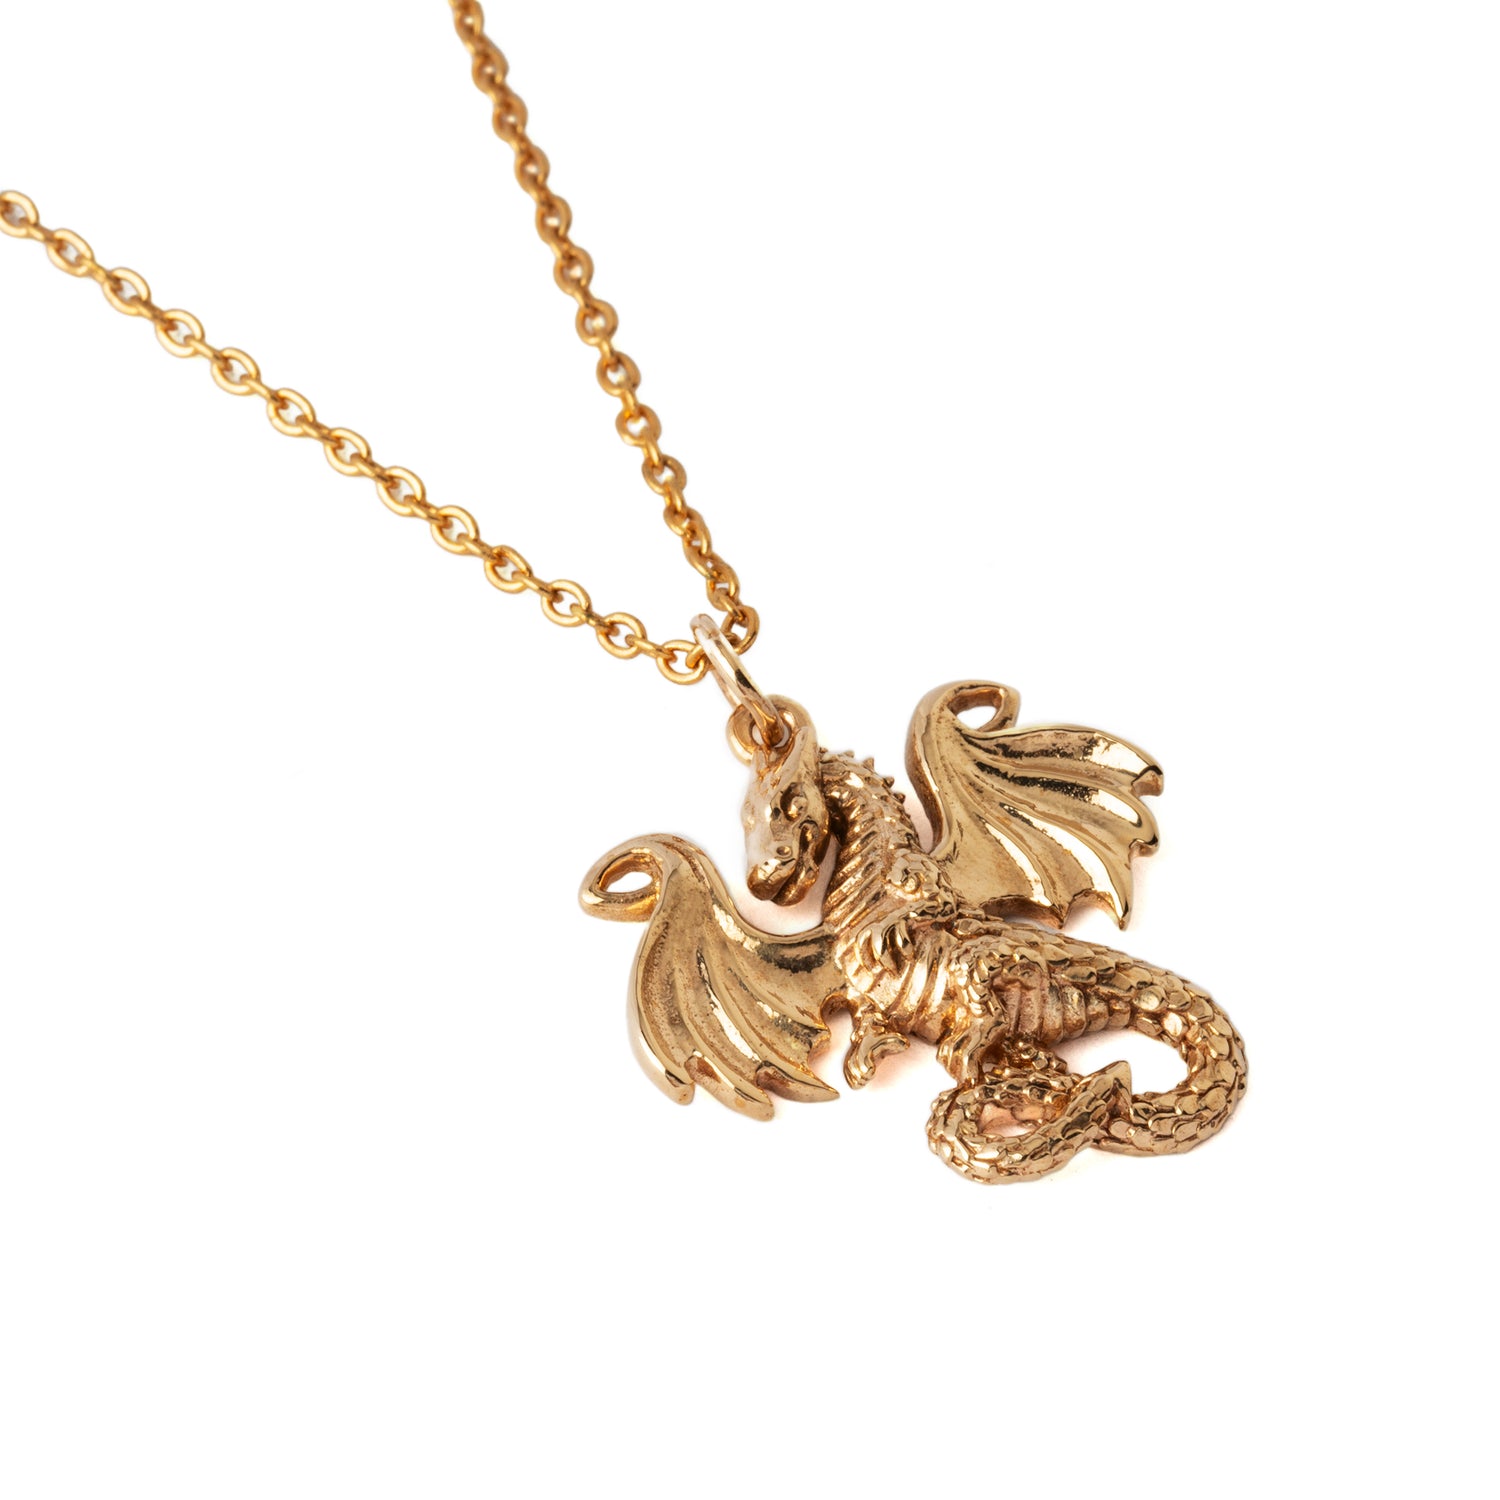 Dragon Charm right side view